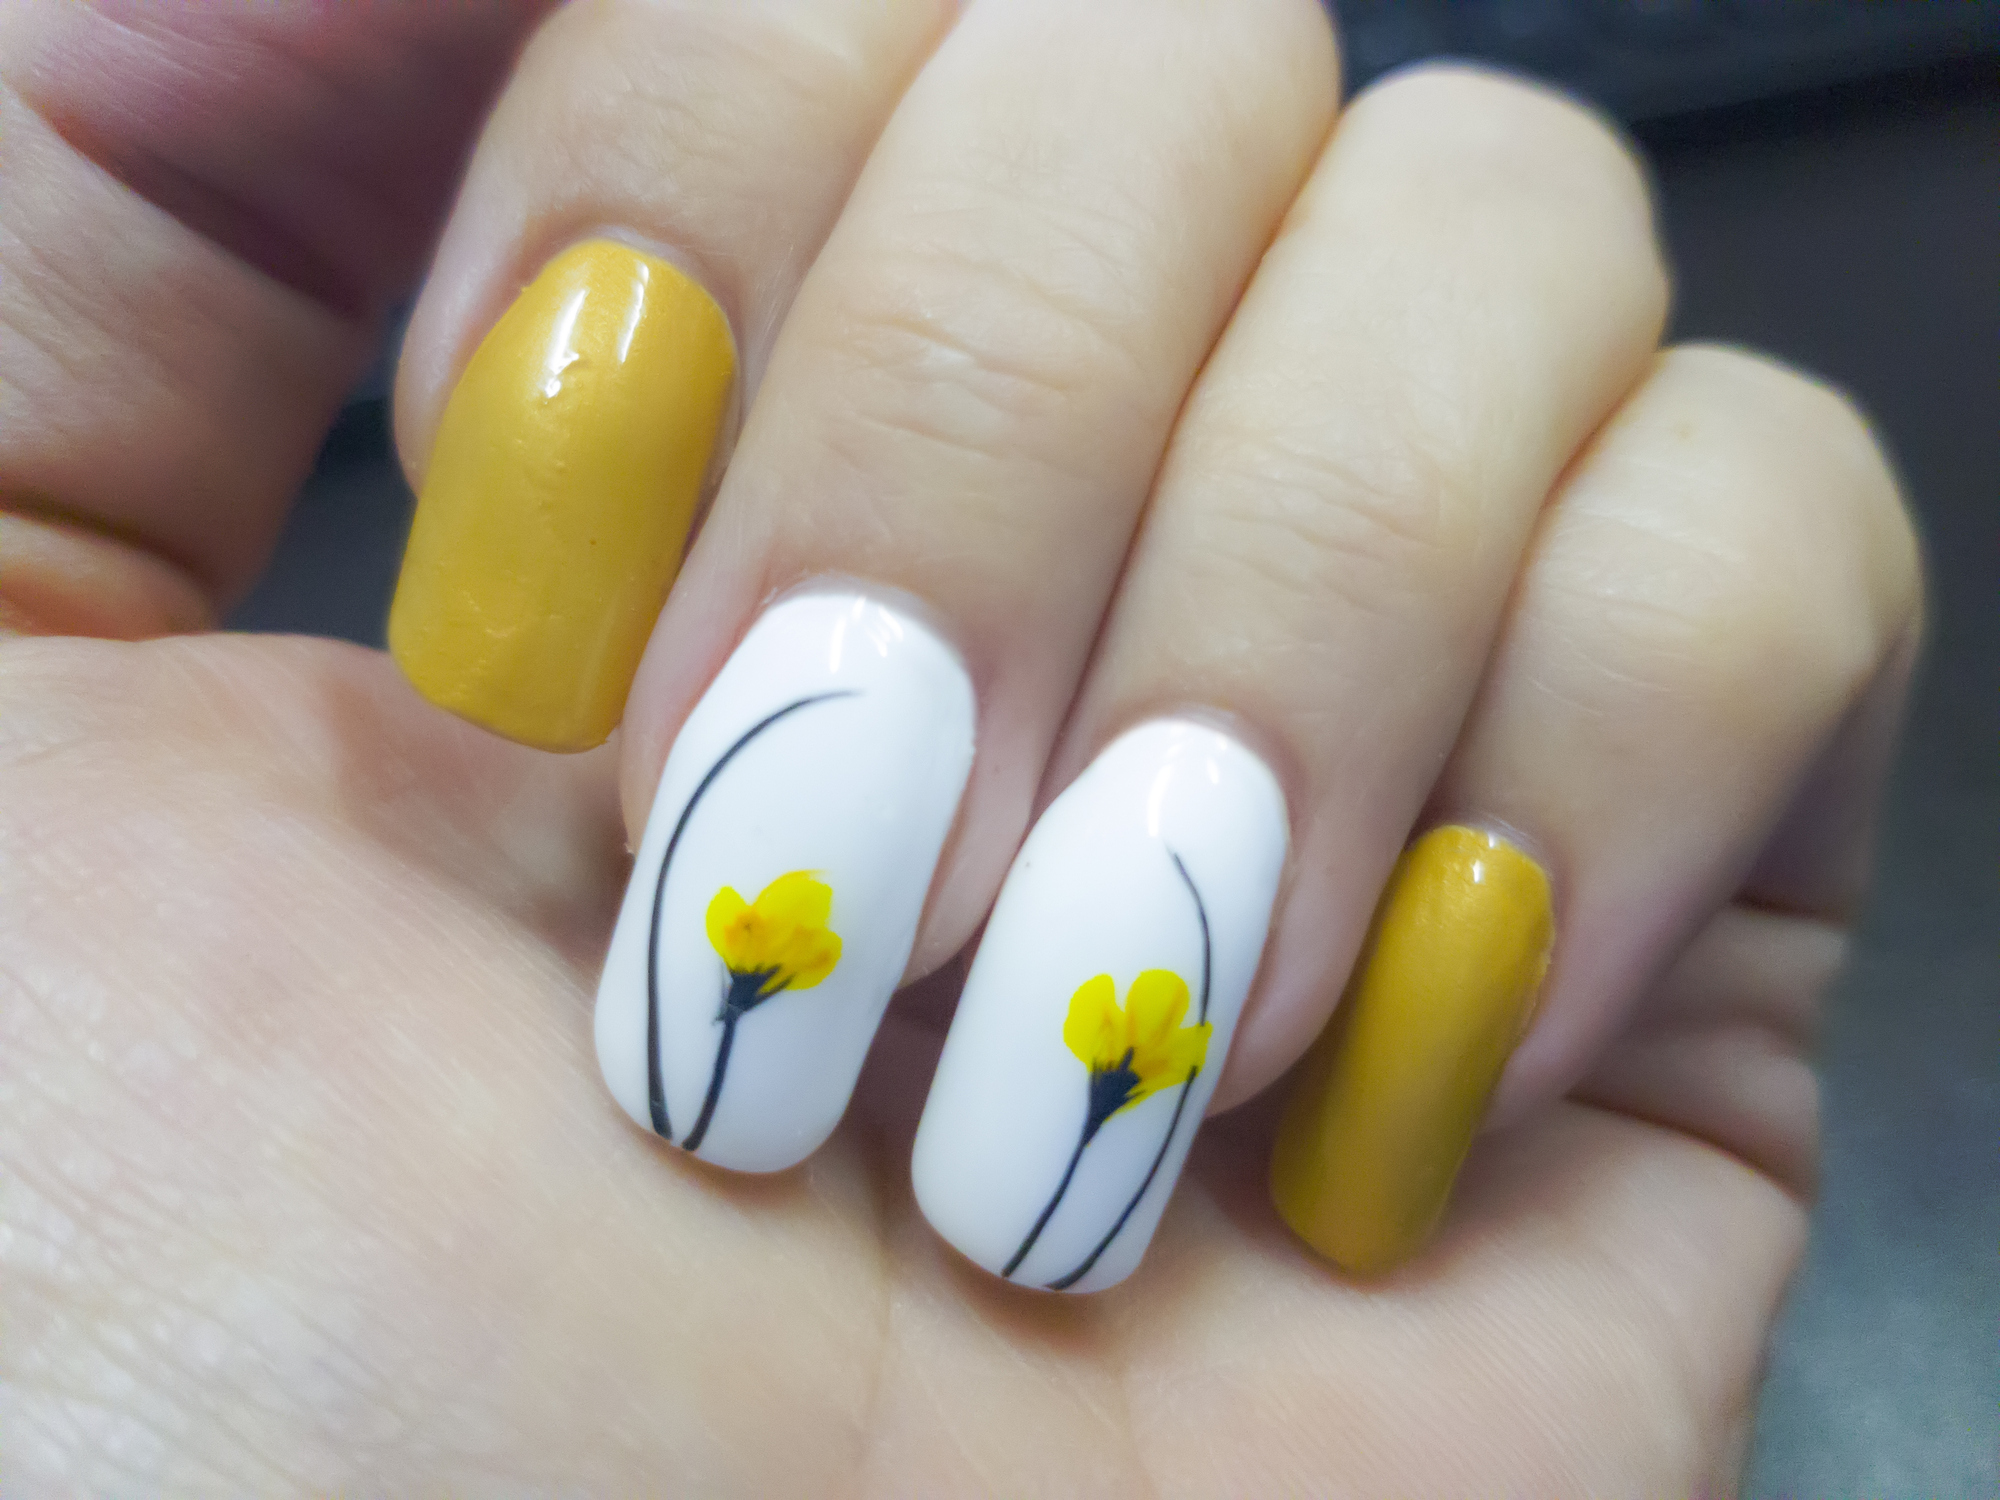 7 Easy and Stylish Step-by-Step Beginner Nail Art Tutorials